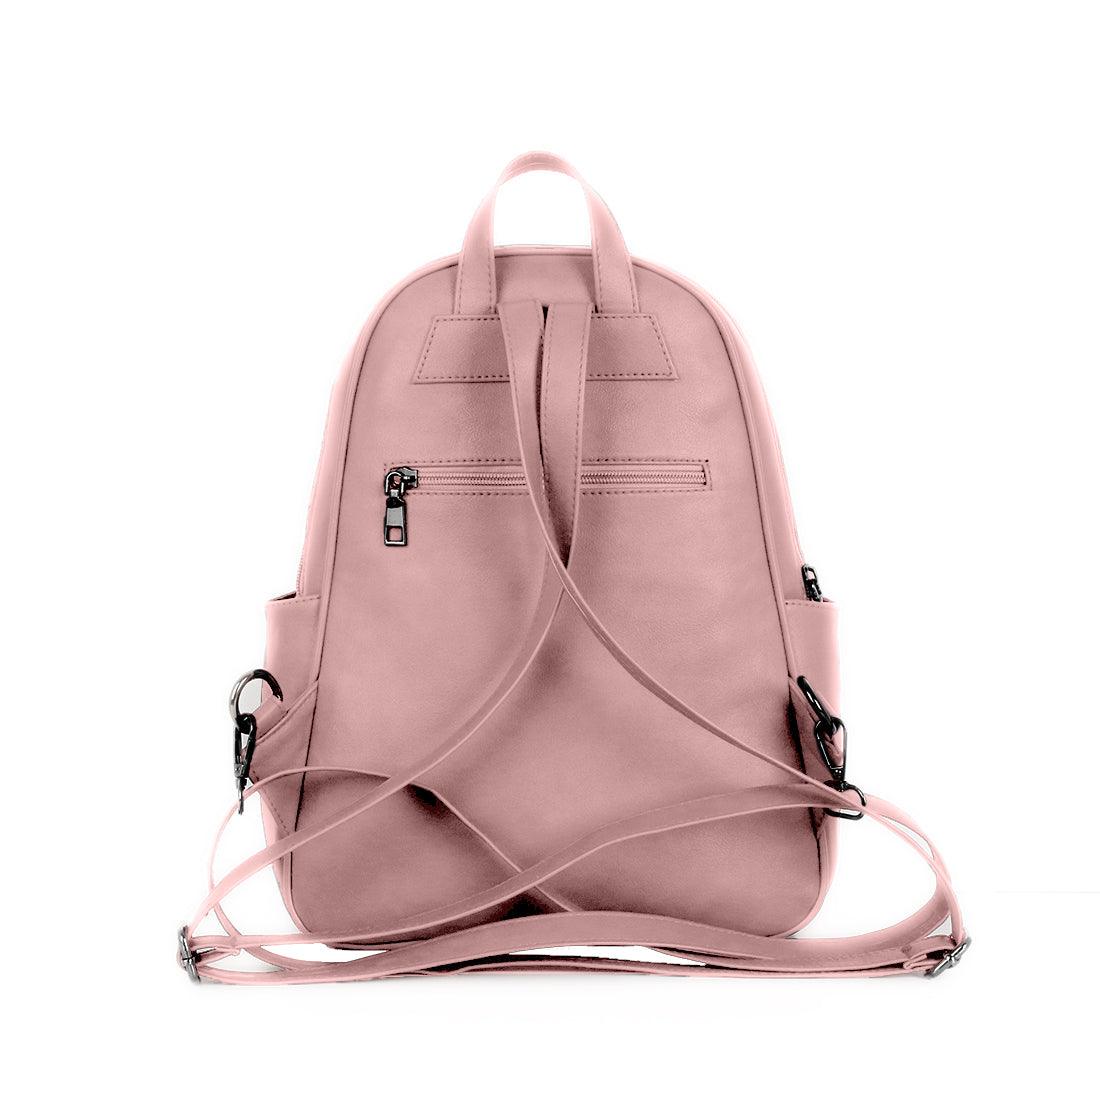 Rose Mixed Backpack White Floral - CANVAEGYPT